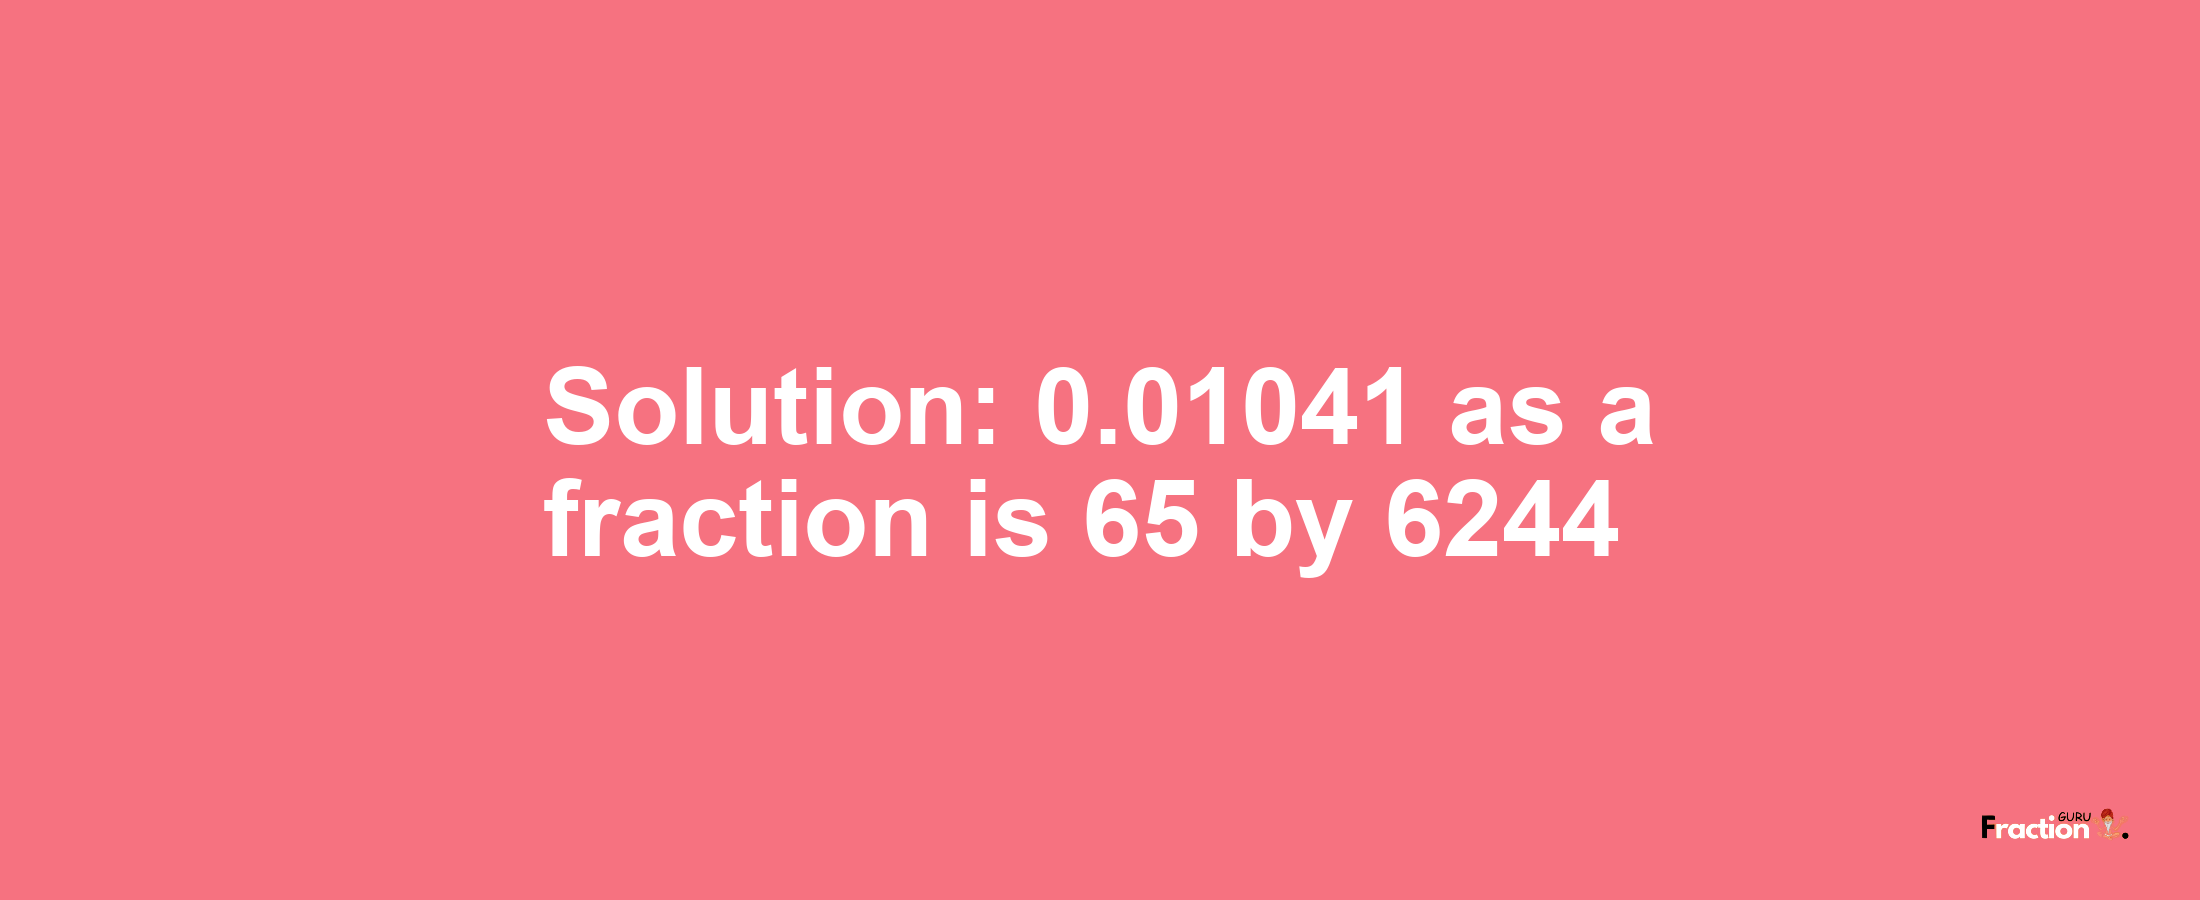 Solution:0.01041 as a fraction is 65/6244